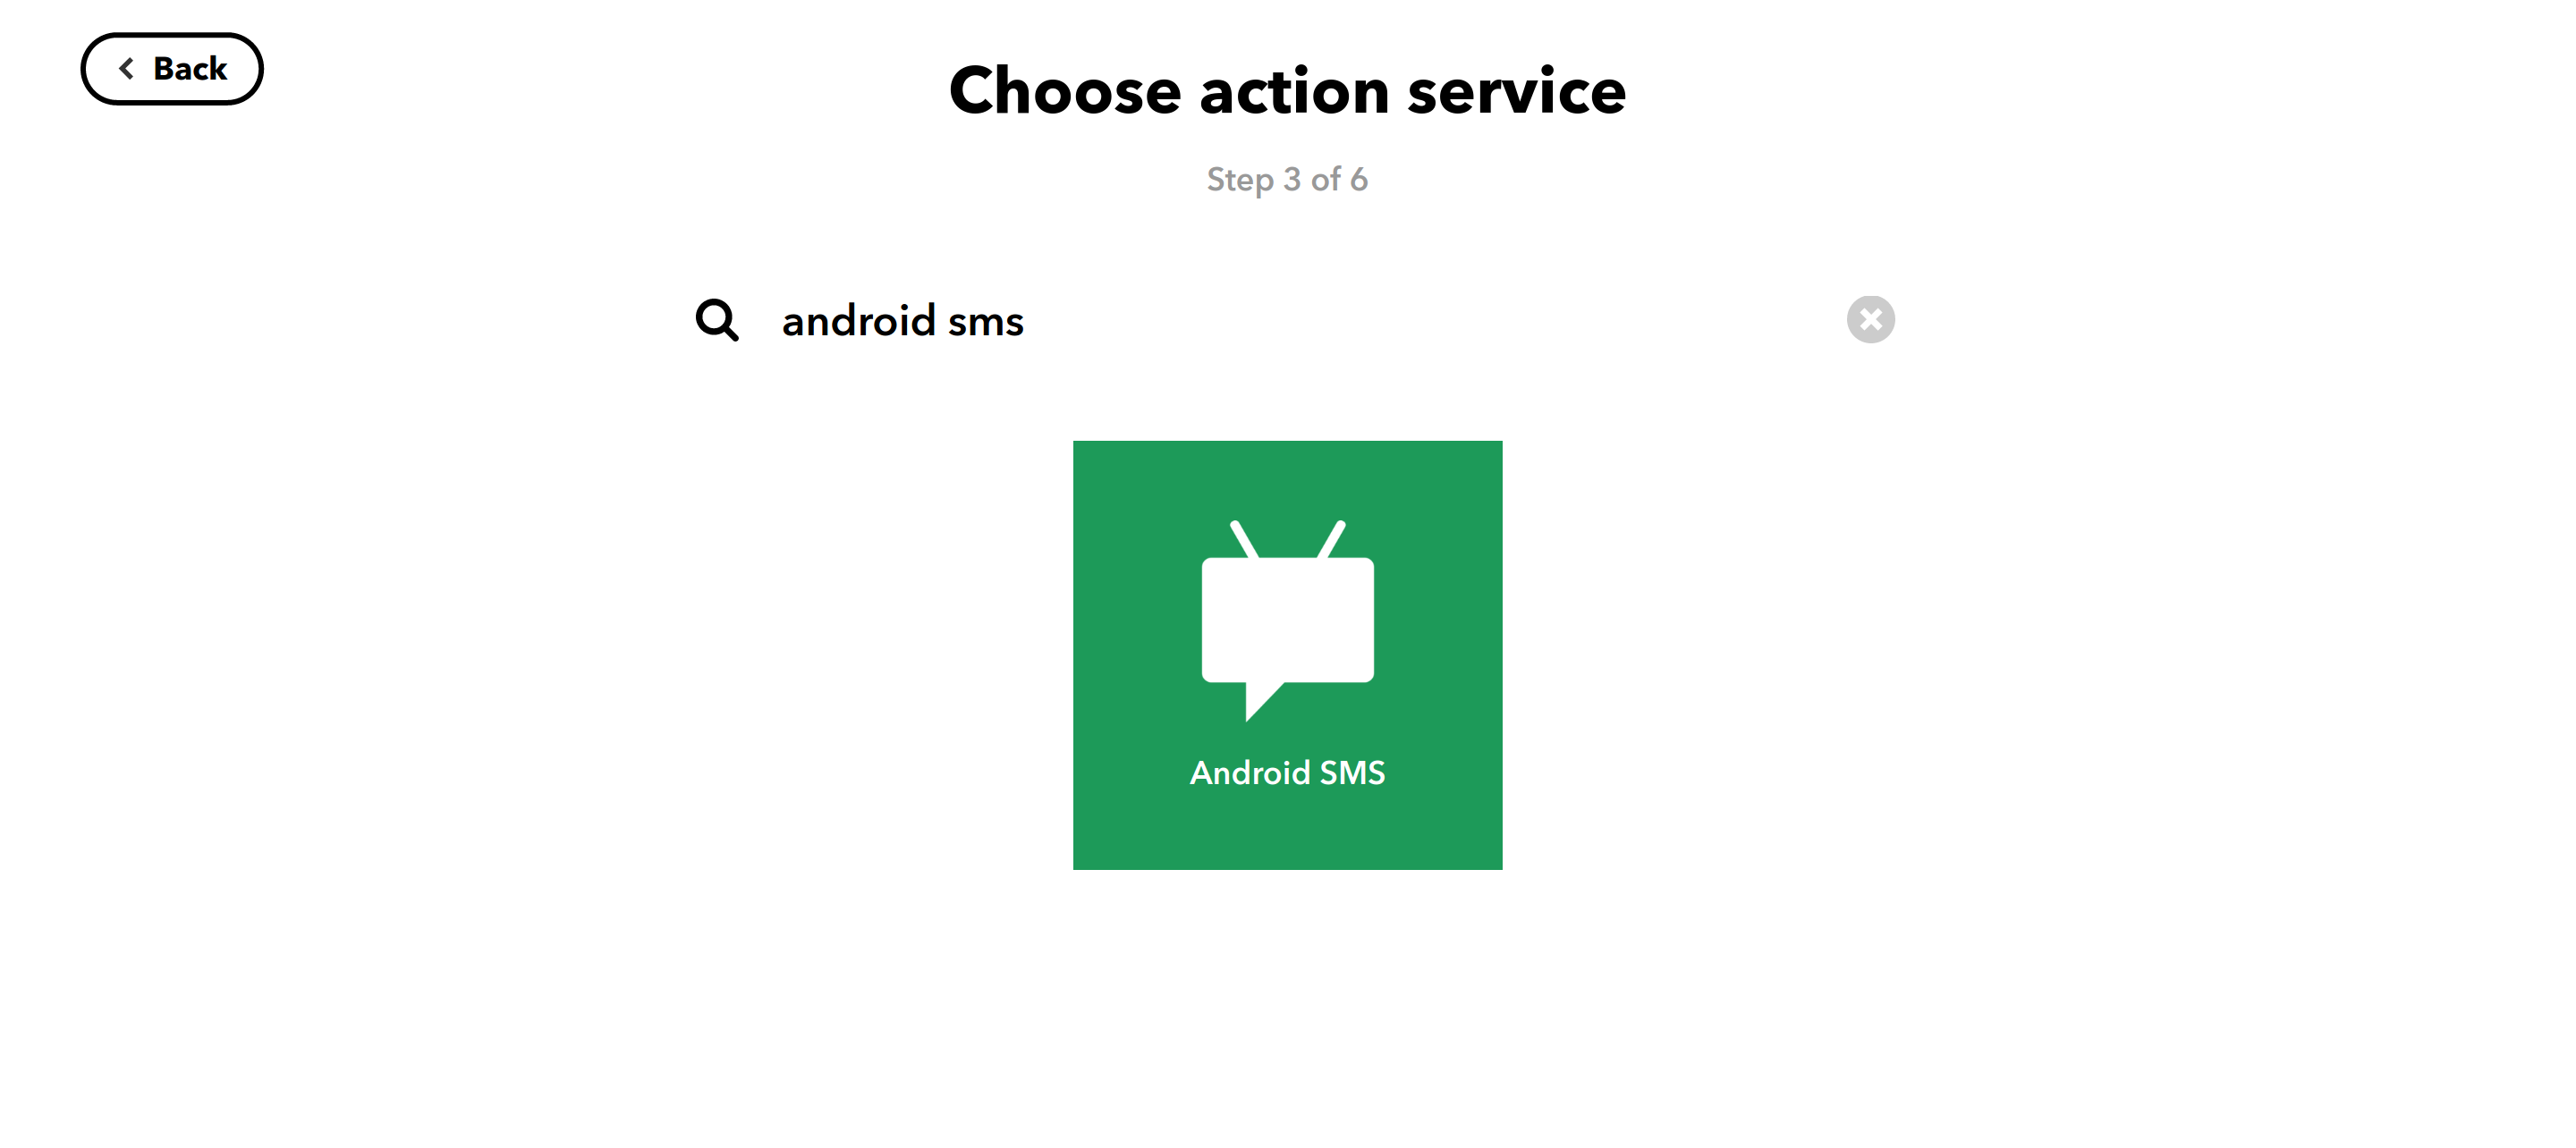 Choosing Android SMS action service